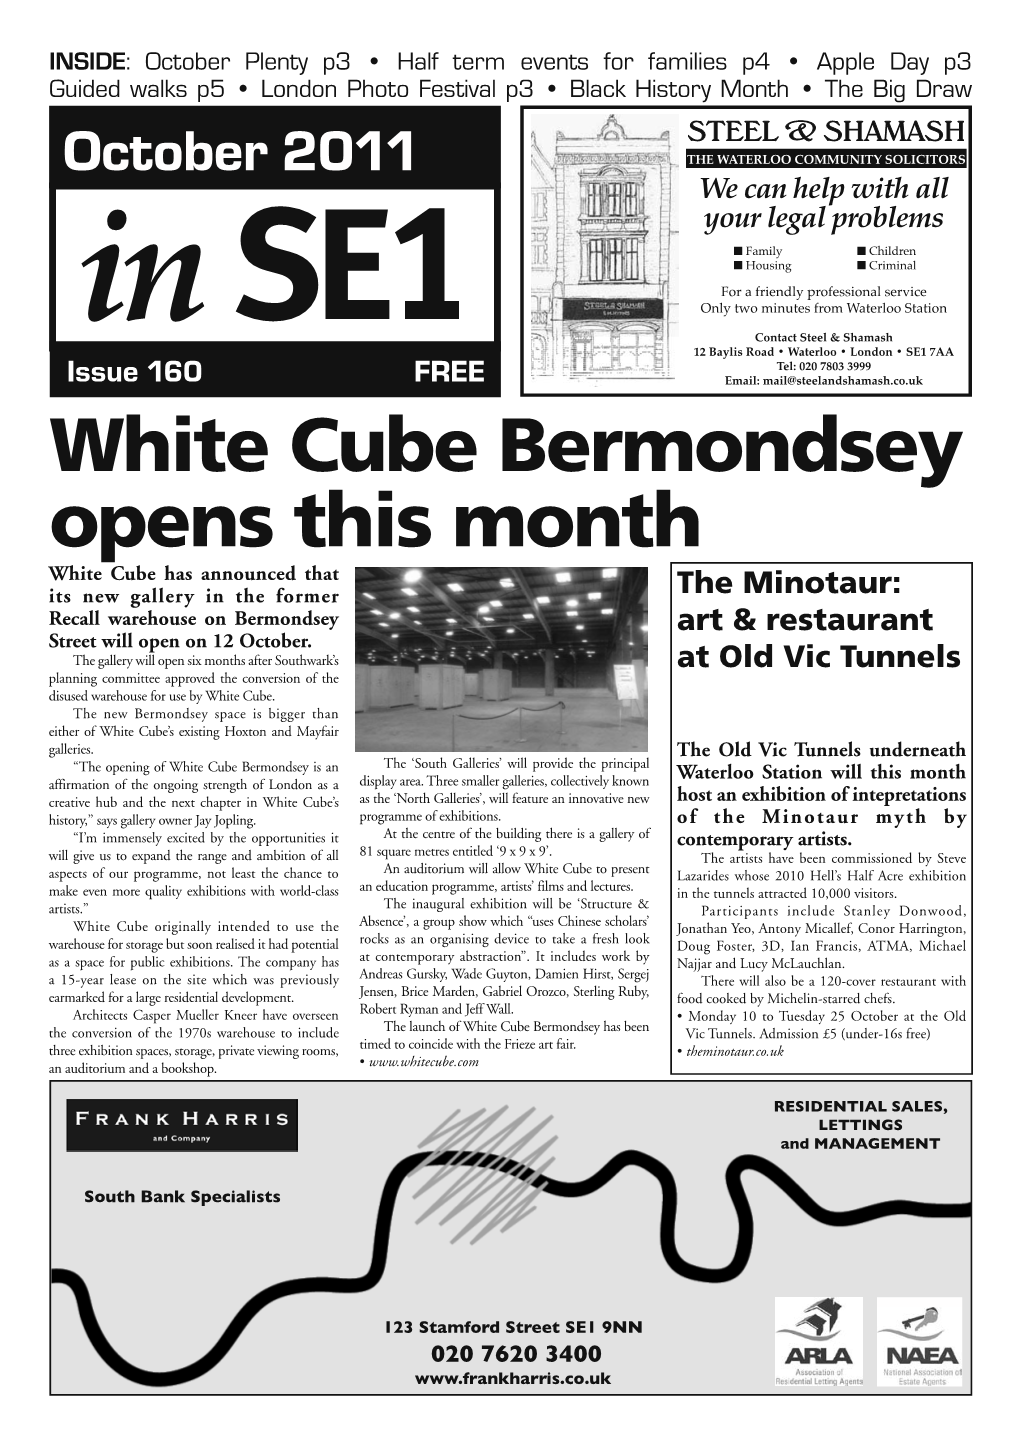 White Cube Bermondsey Opens This Month